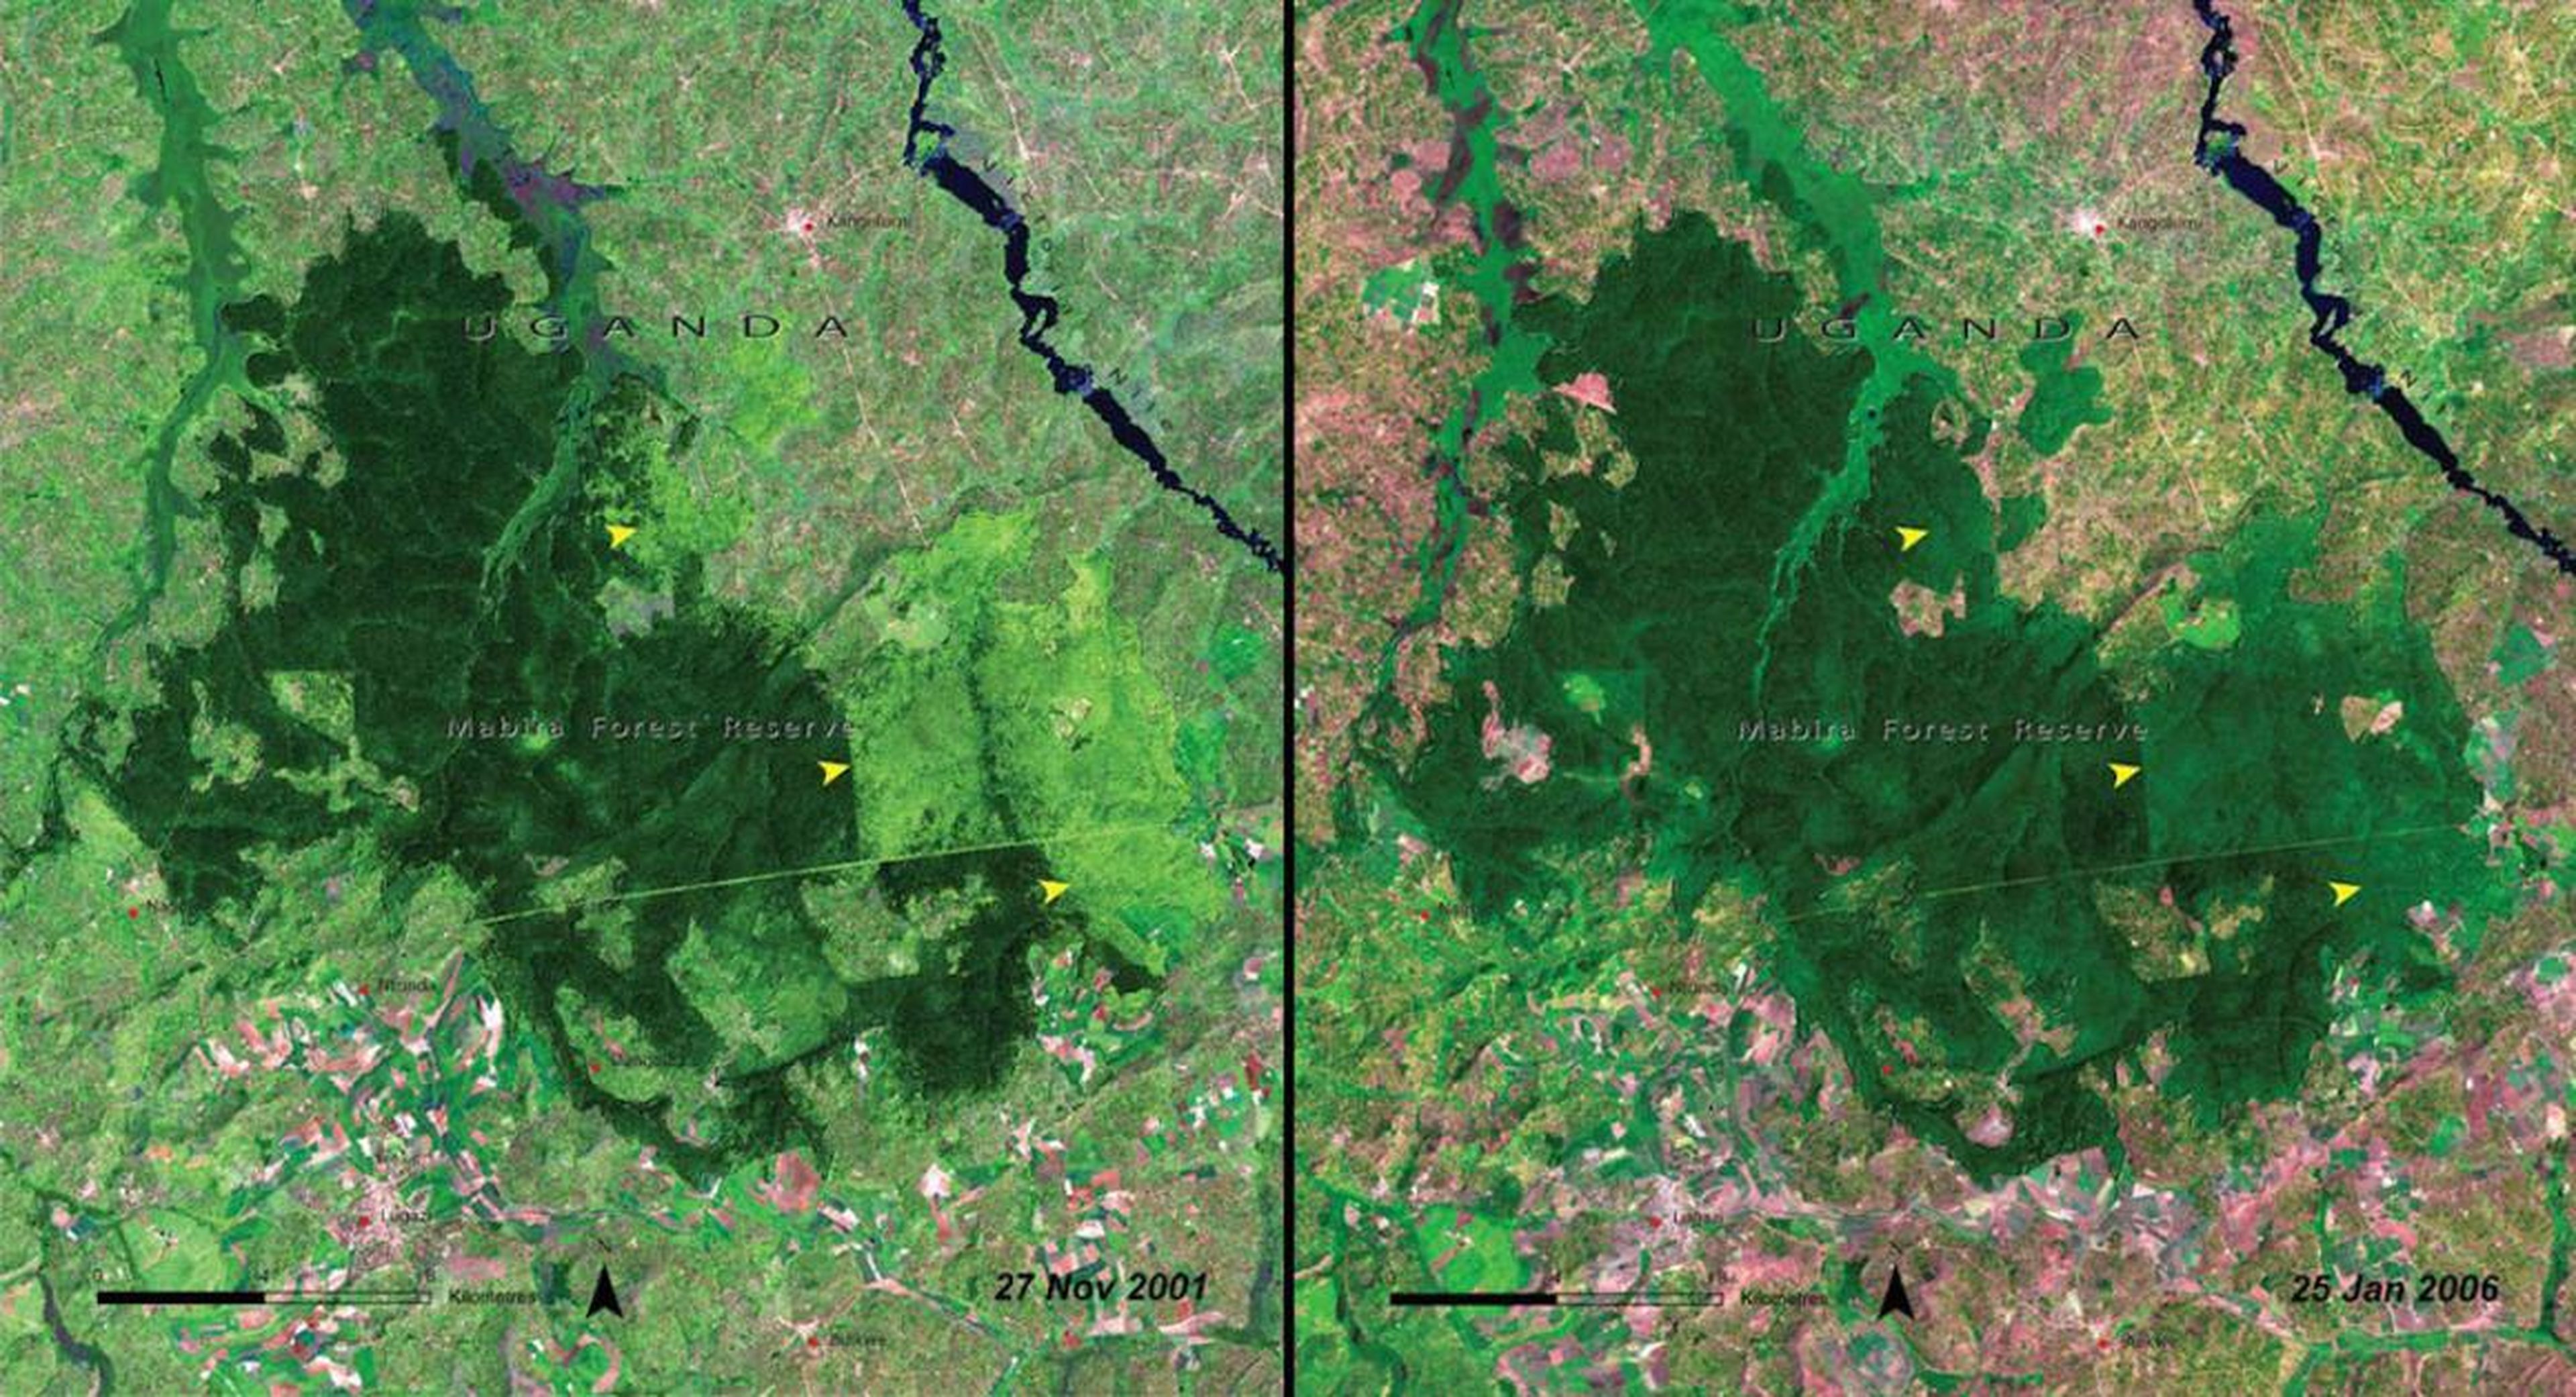 This pair of images shows how Mabira Forest in Uganda changed over just five years, from 2001 (left) to 2006 (right).